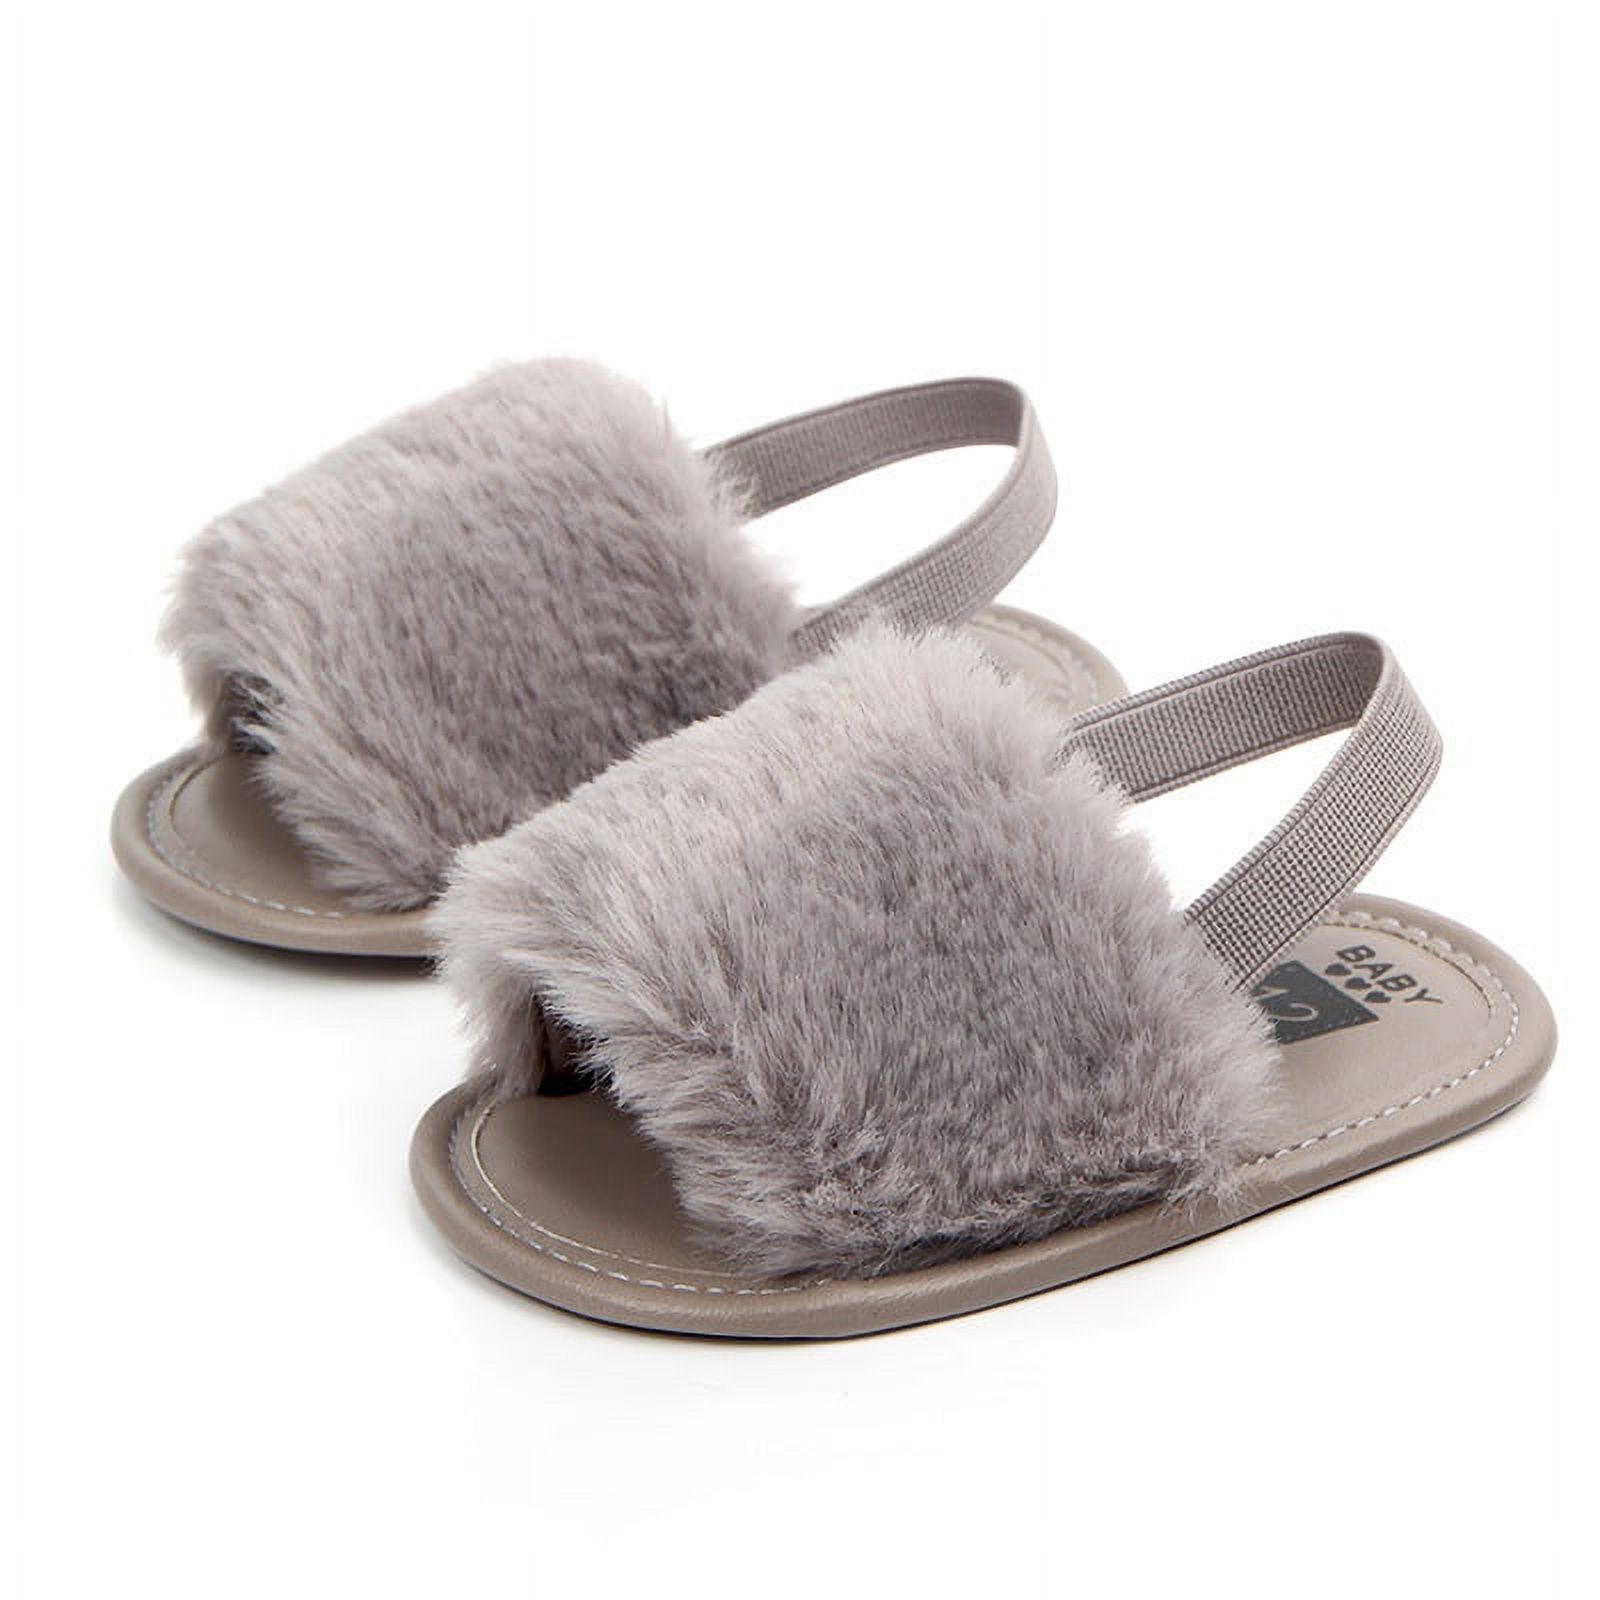 Baby Girls Summer Sandals Non Slip Soft Sole Infant Dress Shoes Newborn Toddler Furry Fur First Walker Crib Shoes House Slipper - image 5 of 5